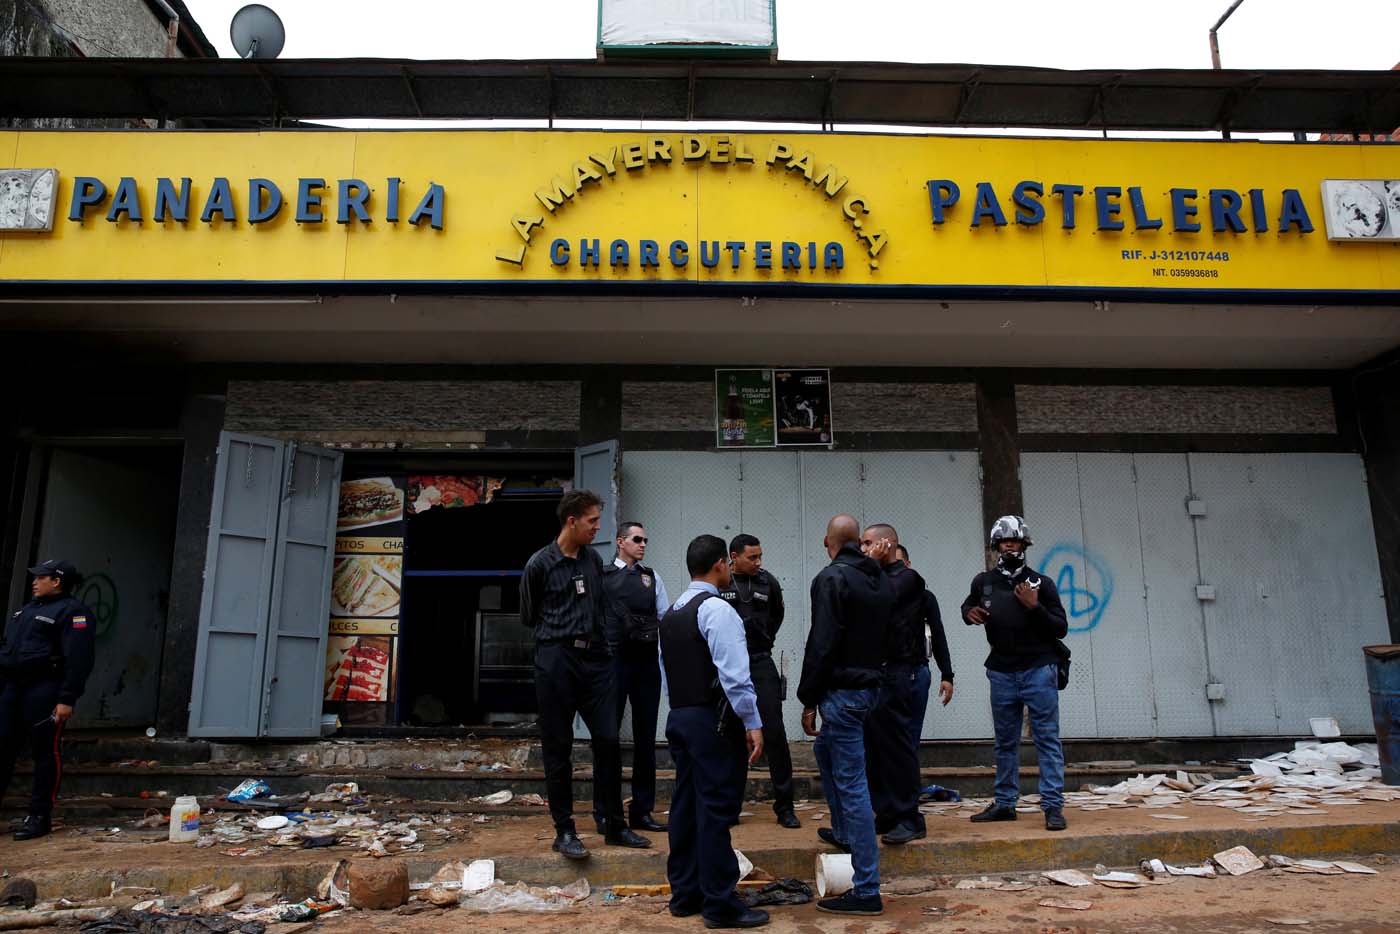 REFILE - UPDATING SLUG Police officers and criminal investigators stand in front of a bakery, after it was looted in Caracas, Venezuela April 21, 2017. REUTERS/Carlos Garcia Rawlins